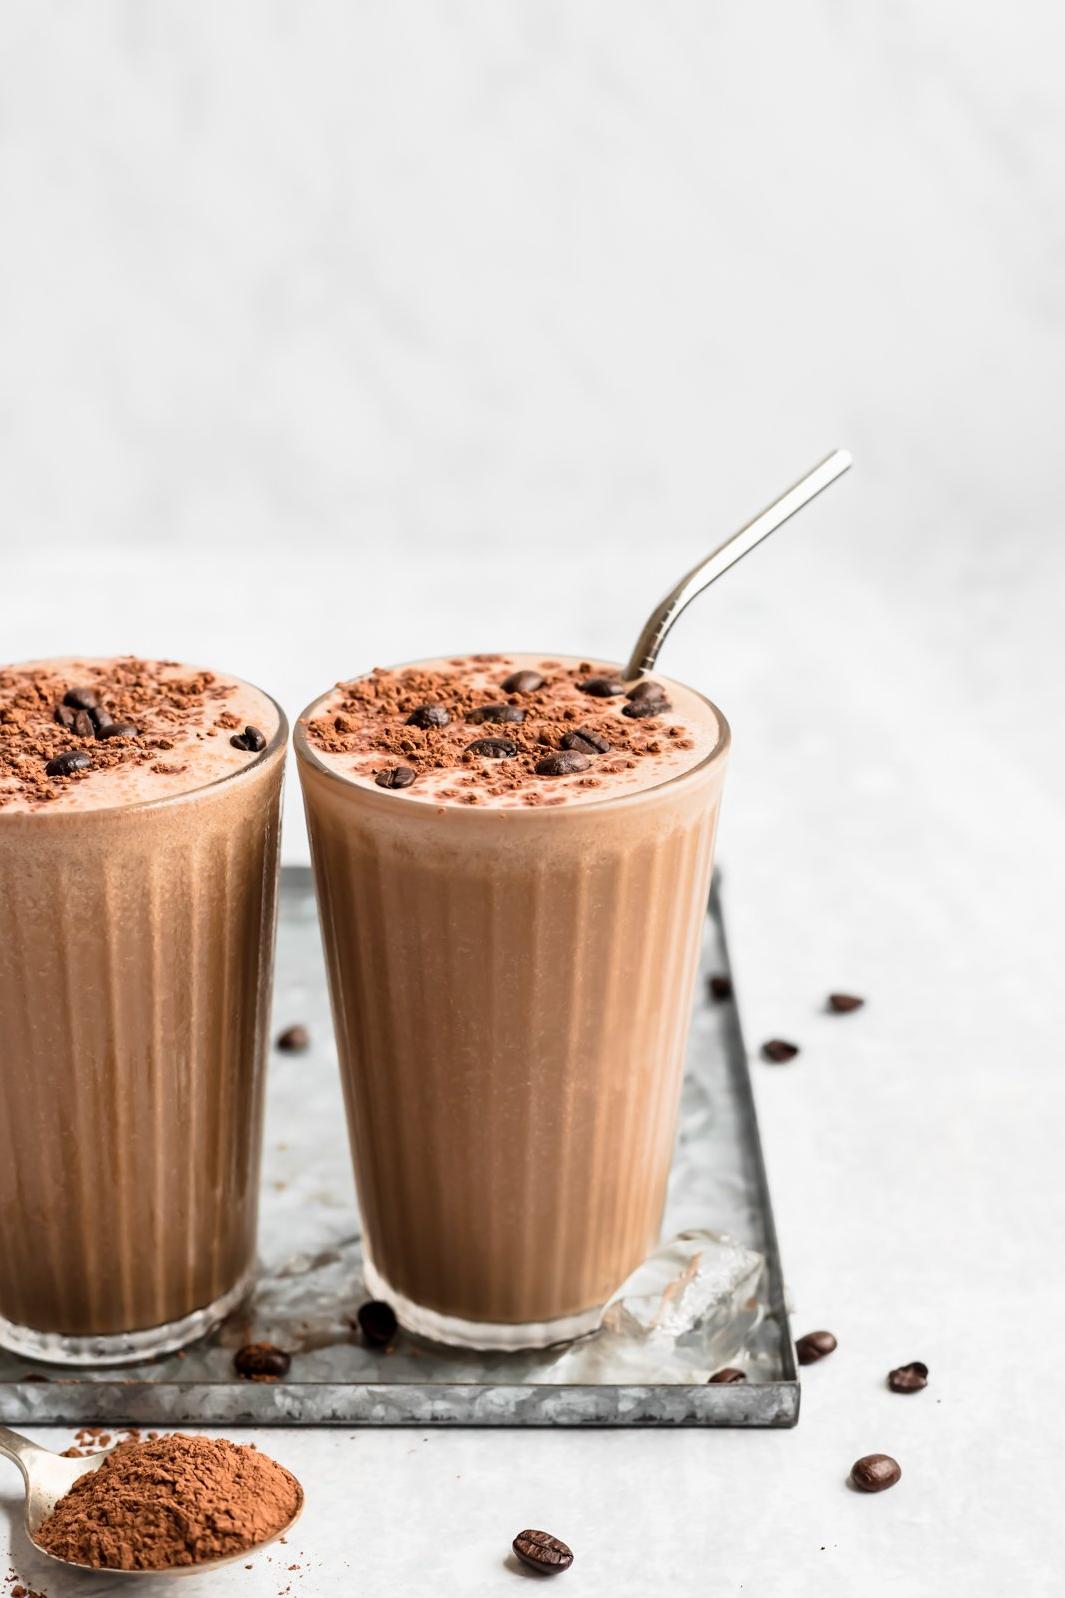  Start your day strong with a delicious and refreshing Coffee Vanilla Chocolate Smoothie.